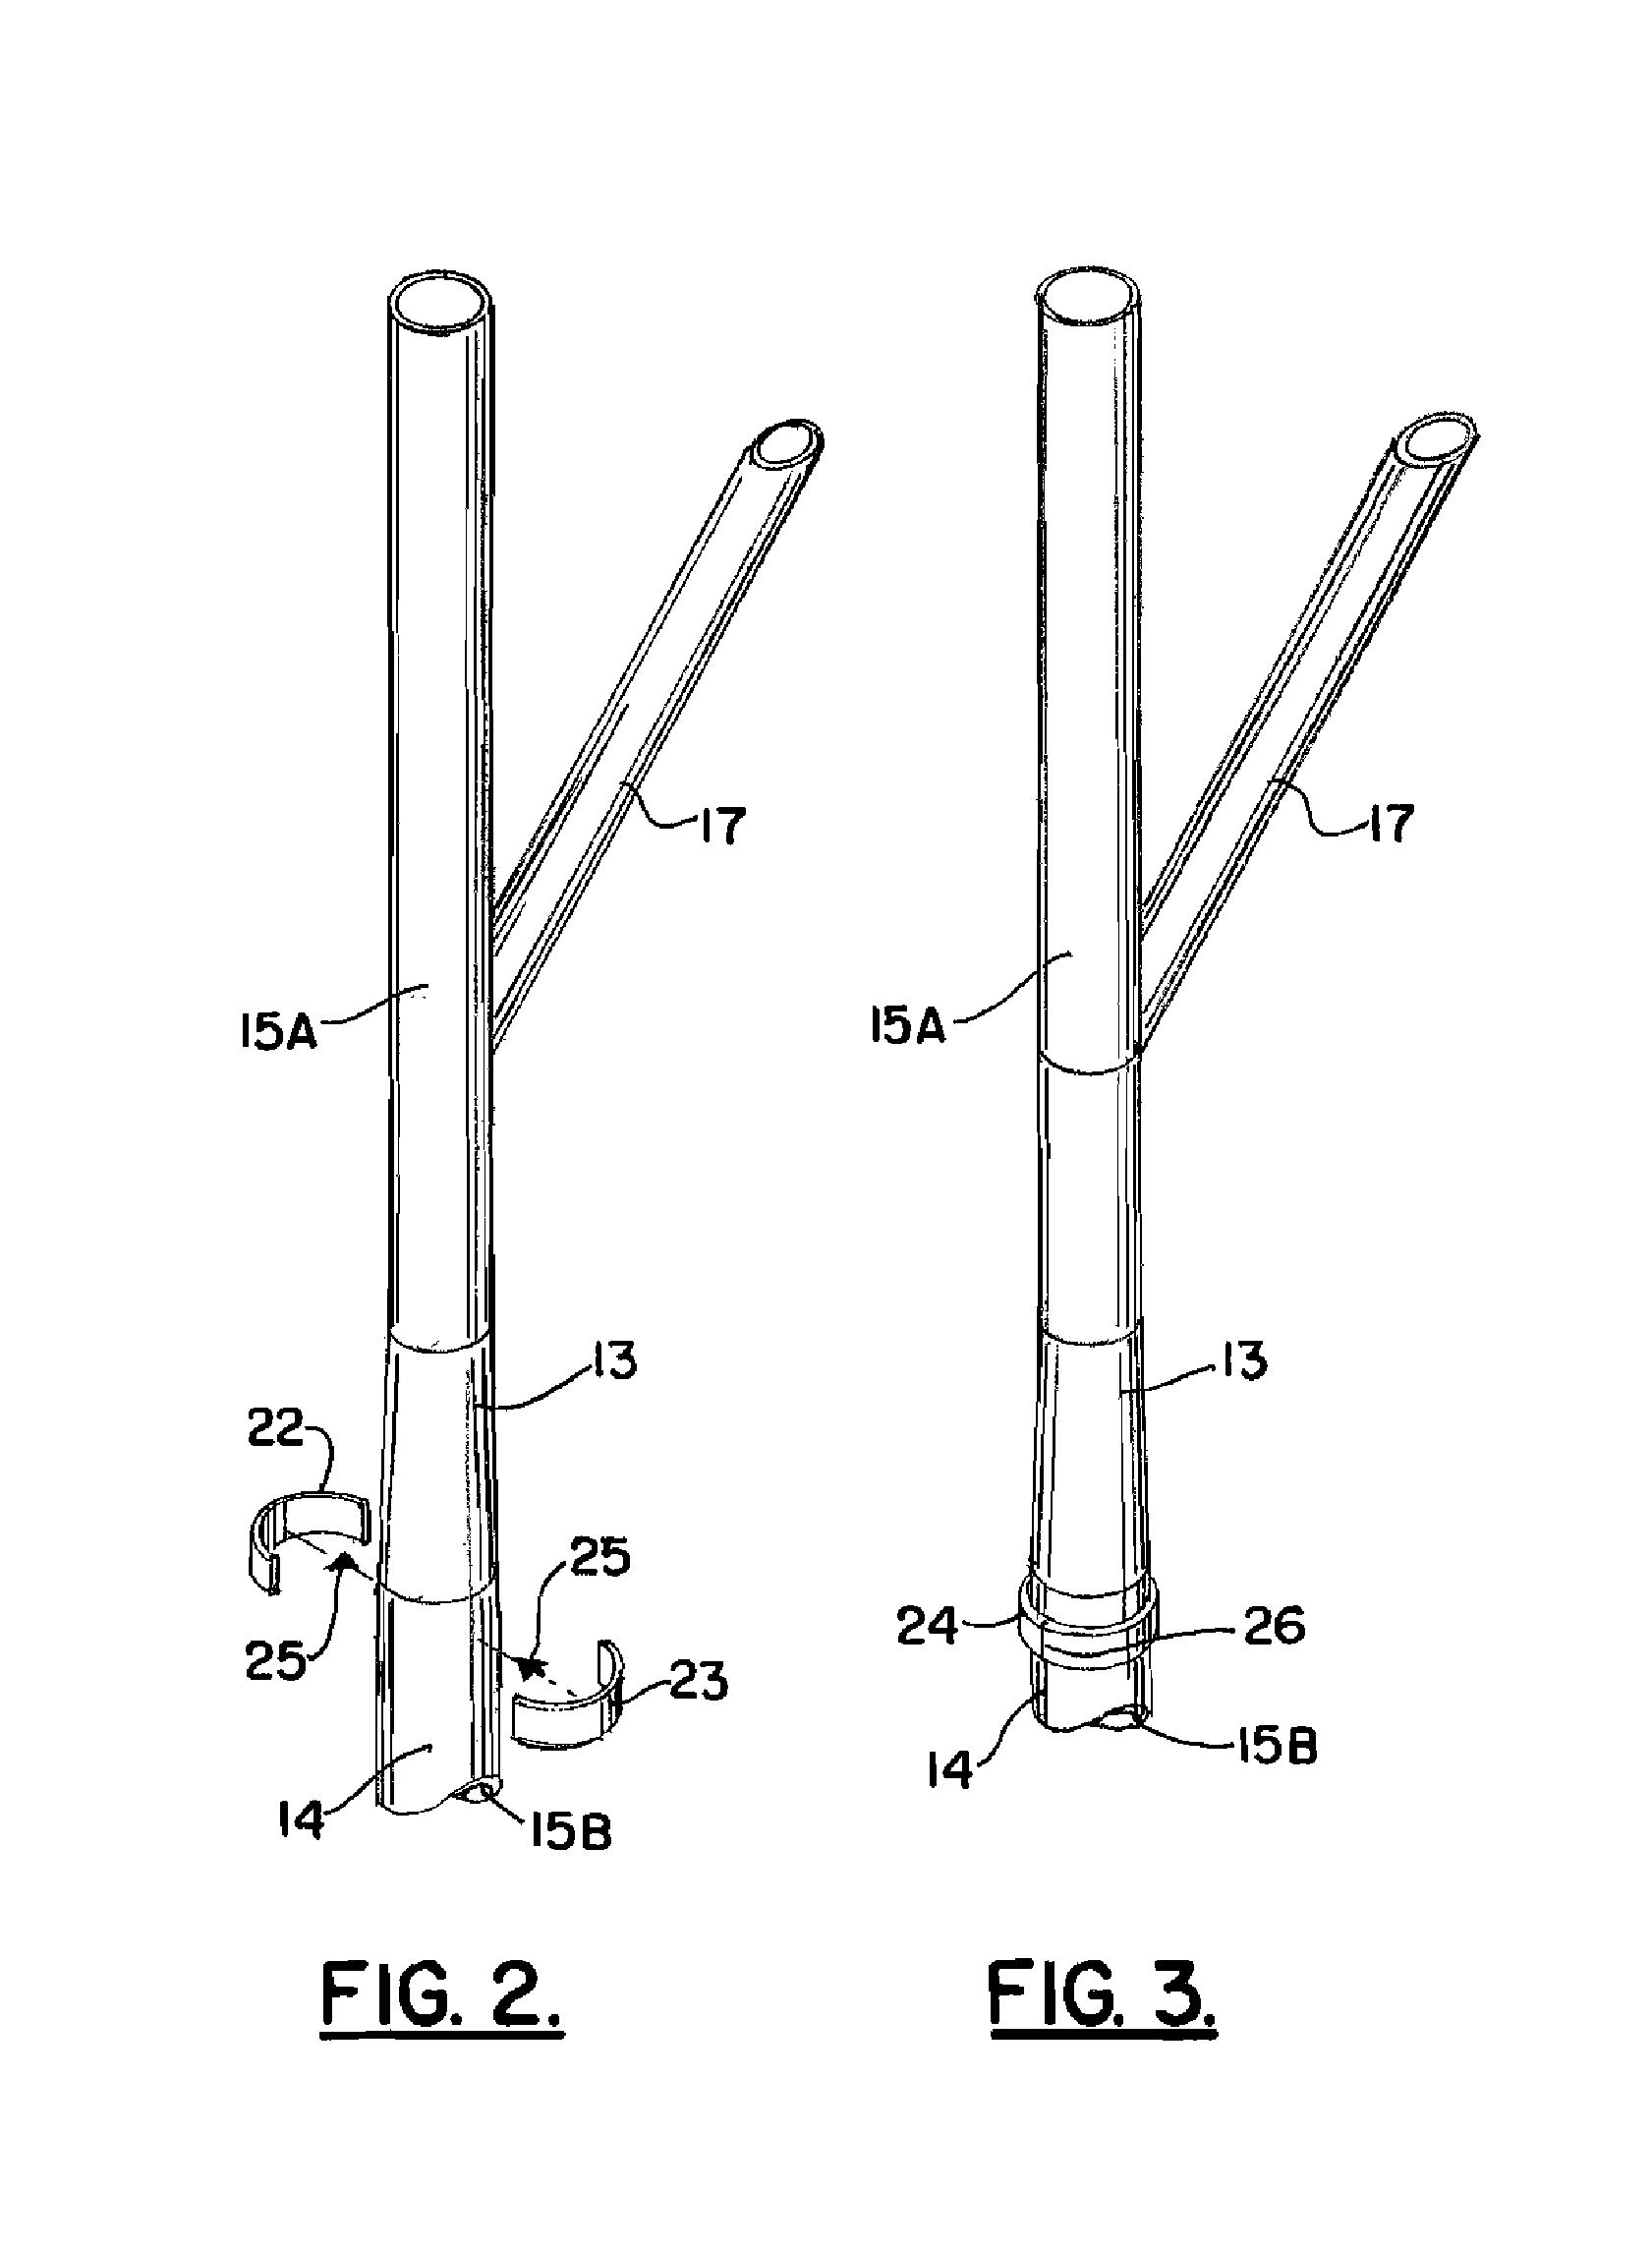 Method and apparatus for elevating a marine platform